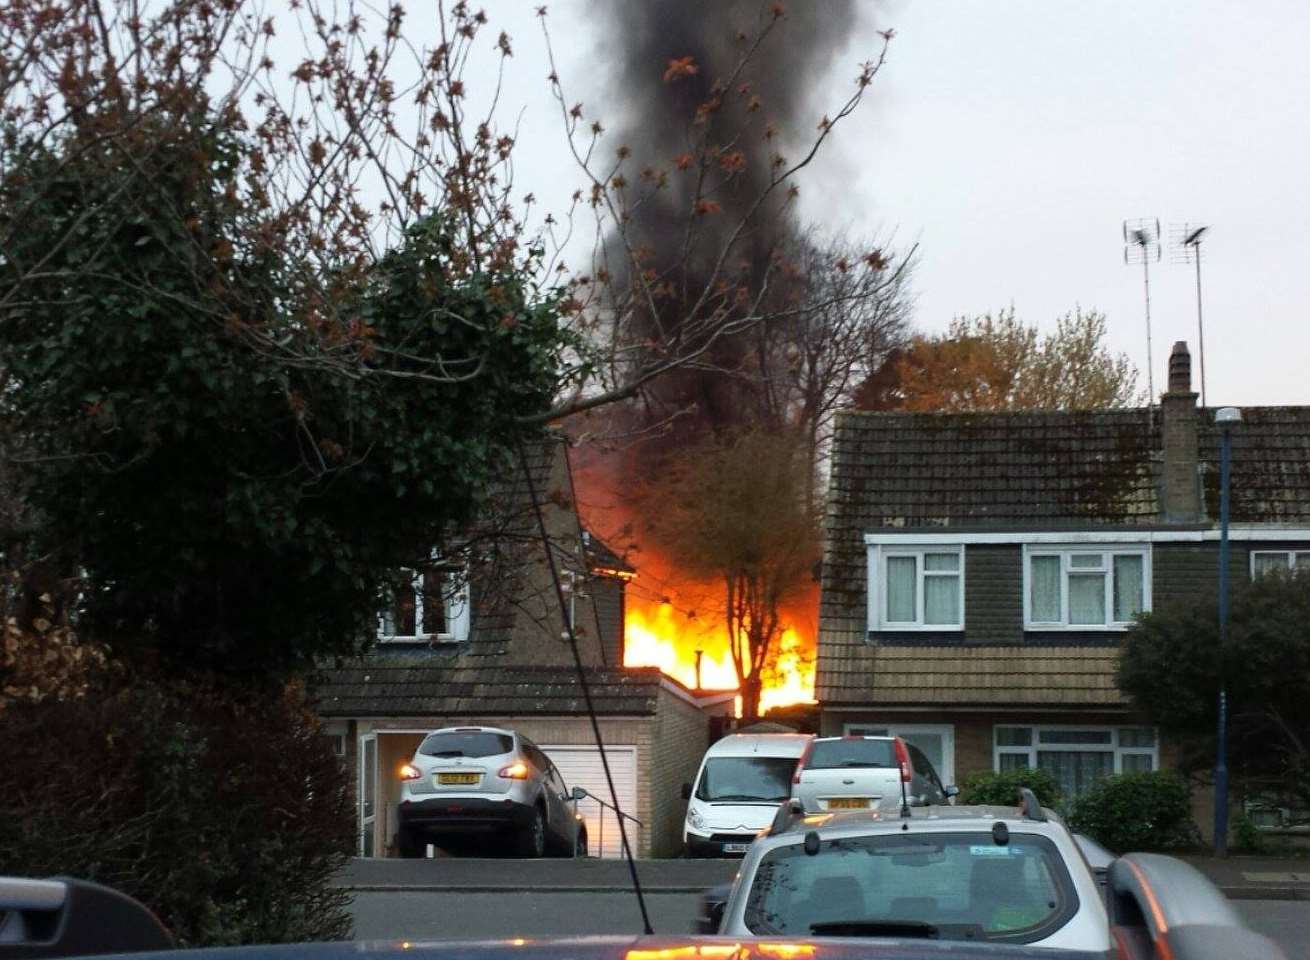 The shed caught fire in Abingdon Road Picture: Kent_999s